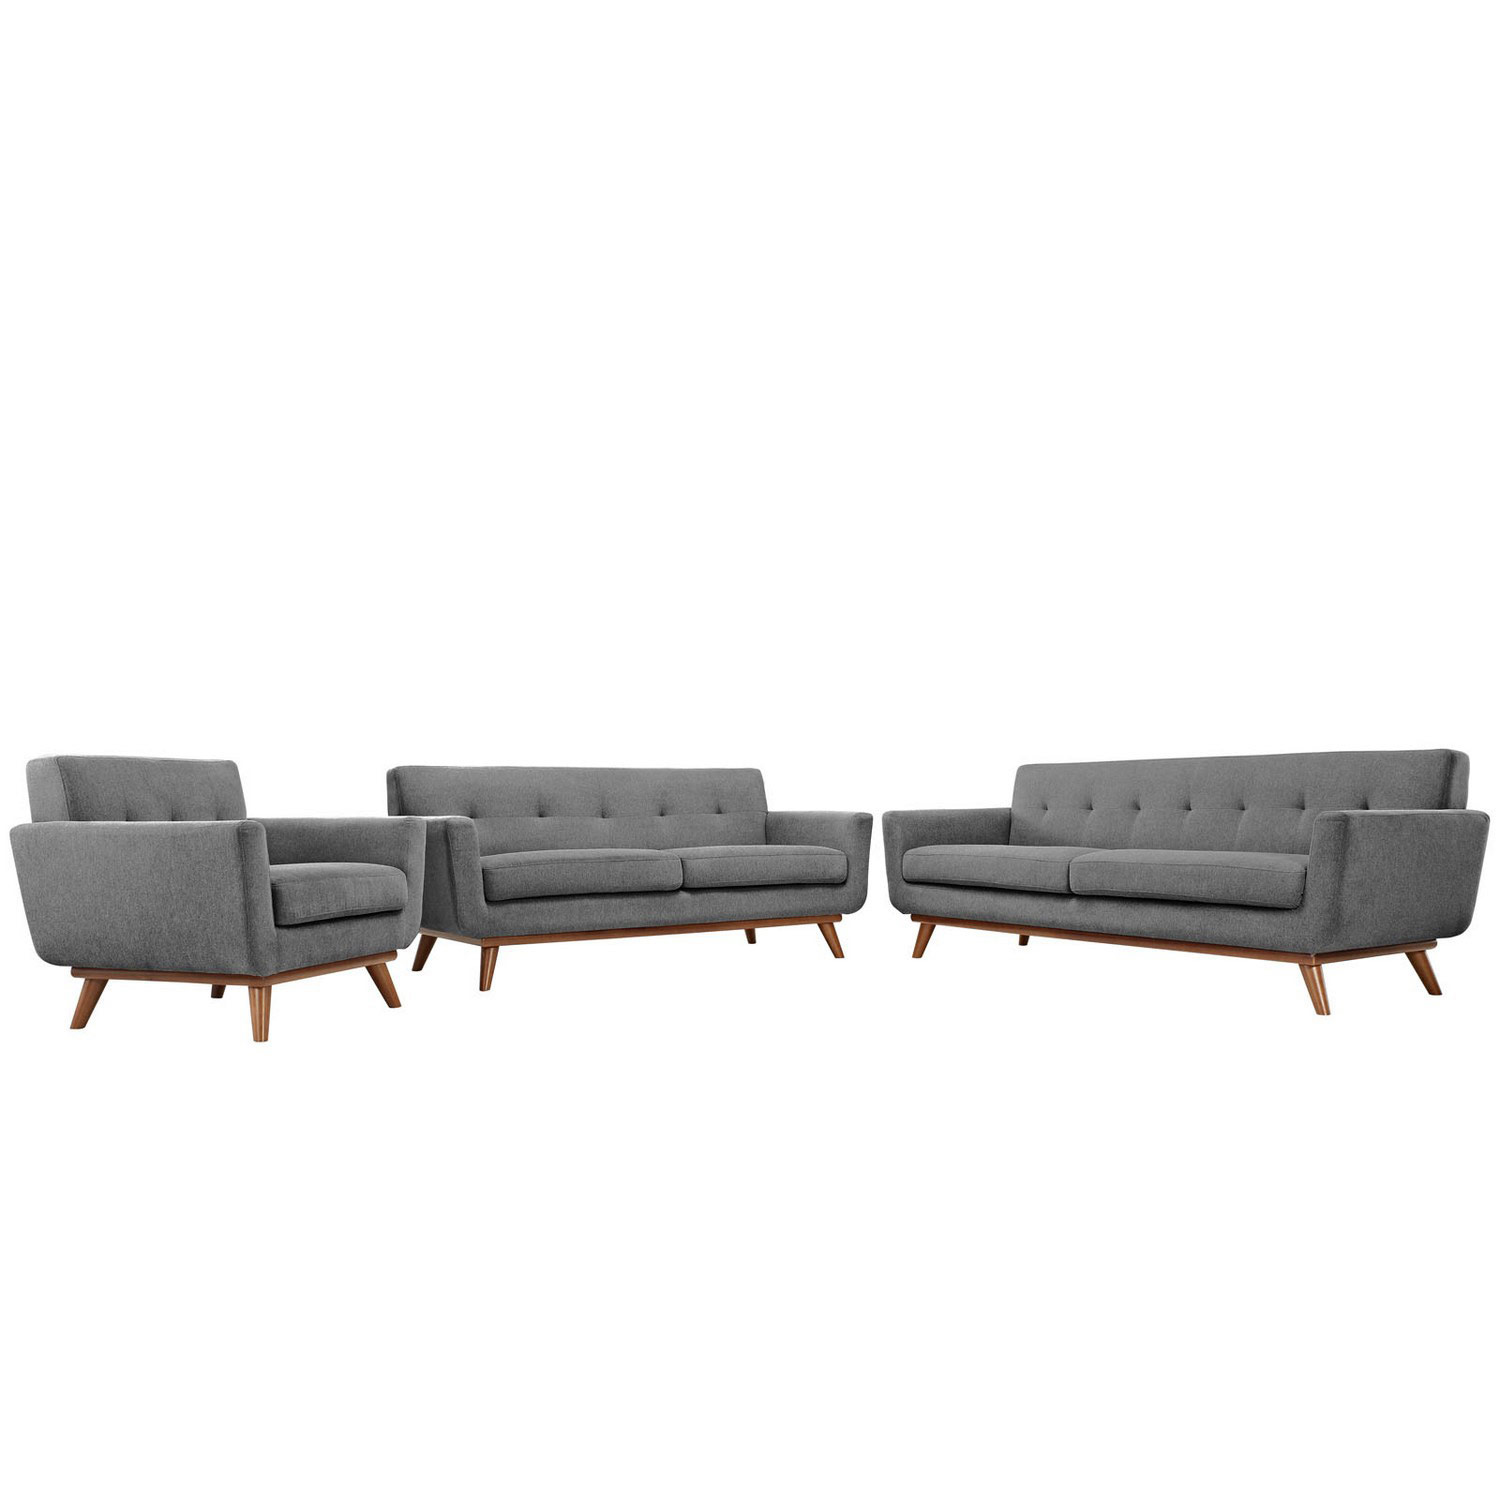 Modway Engage 3 PC Sofa Loveseat and Armchair Set - Gray